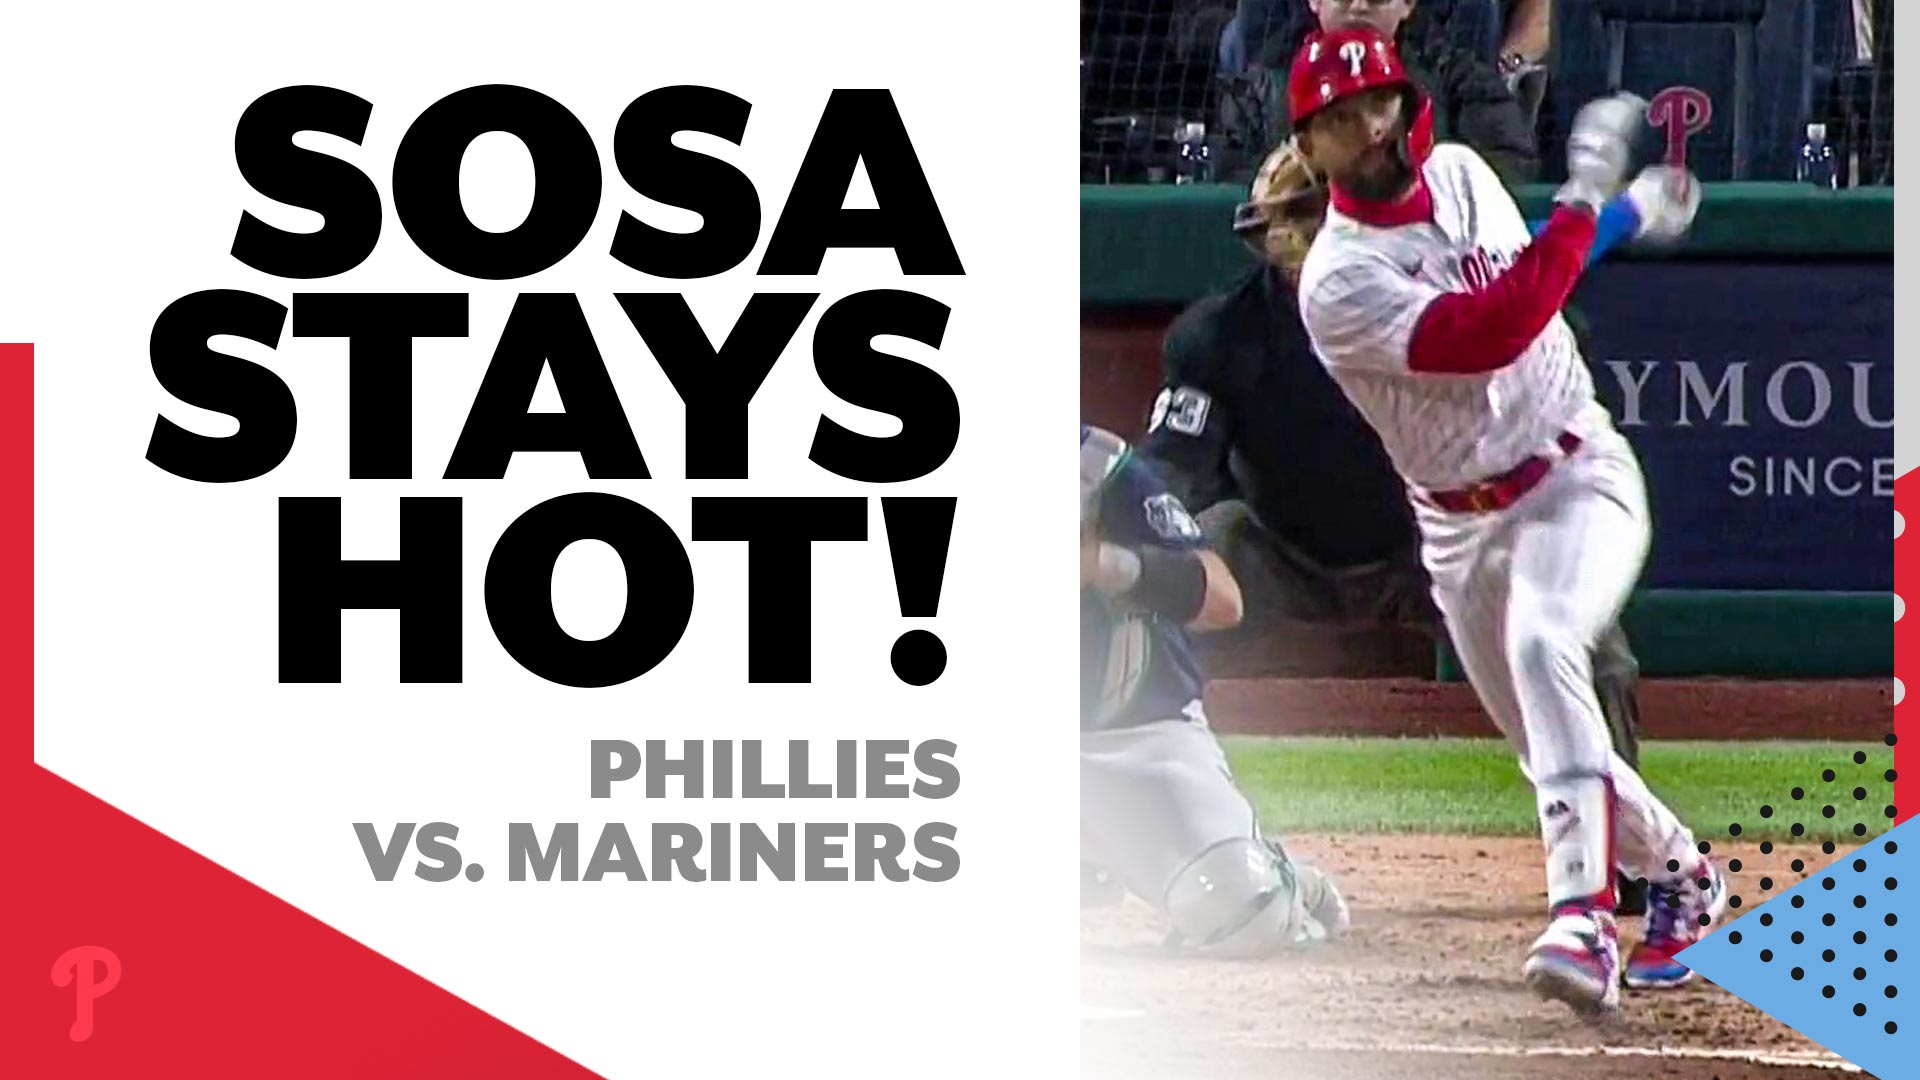 Stay hot, Edmundo Sosa! A no-doubt HR gets the Phillies on the